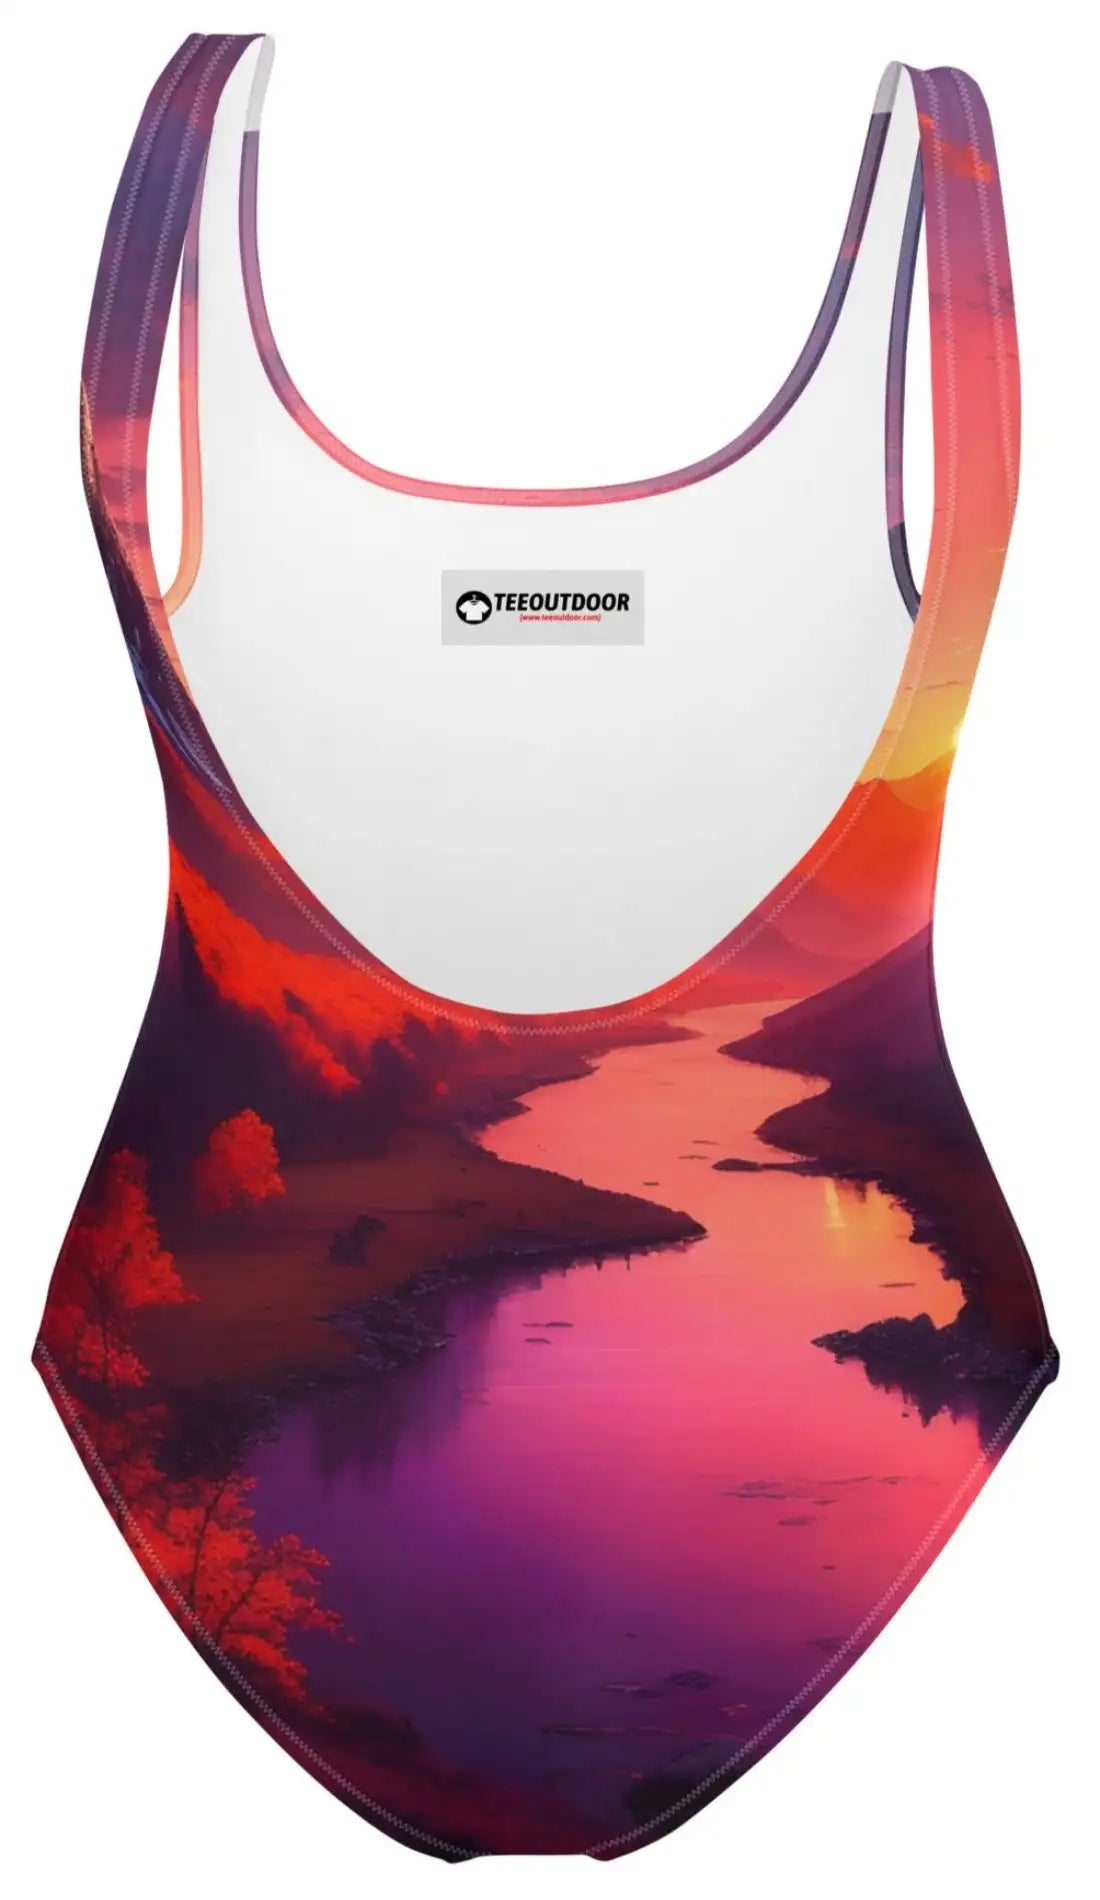 Sundrenched Splendor: Scenic One-Piece Swimsuit